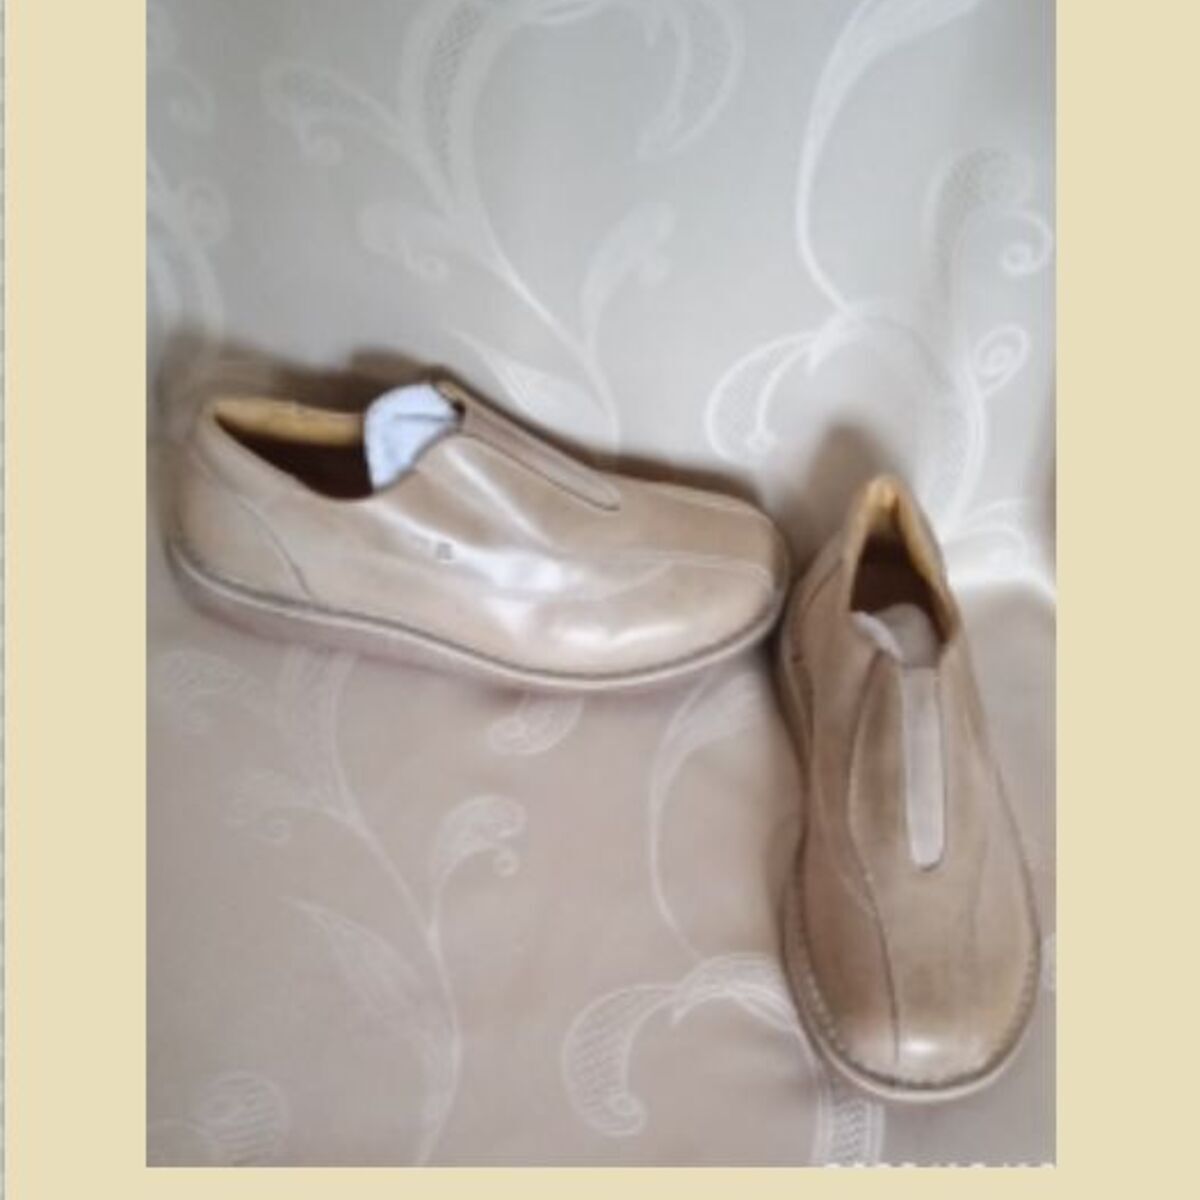 Chaussures Femme Mocassins Alce Chaussures Alce TBE T 41 Beige